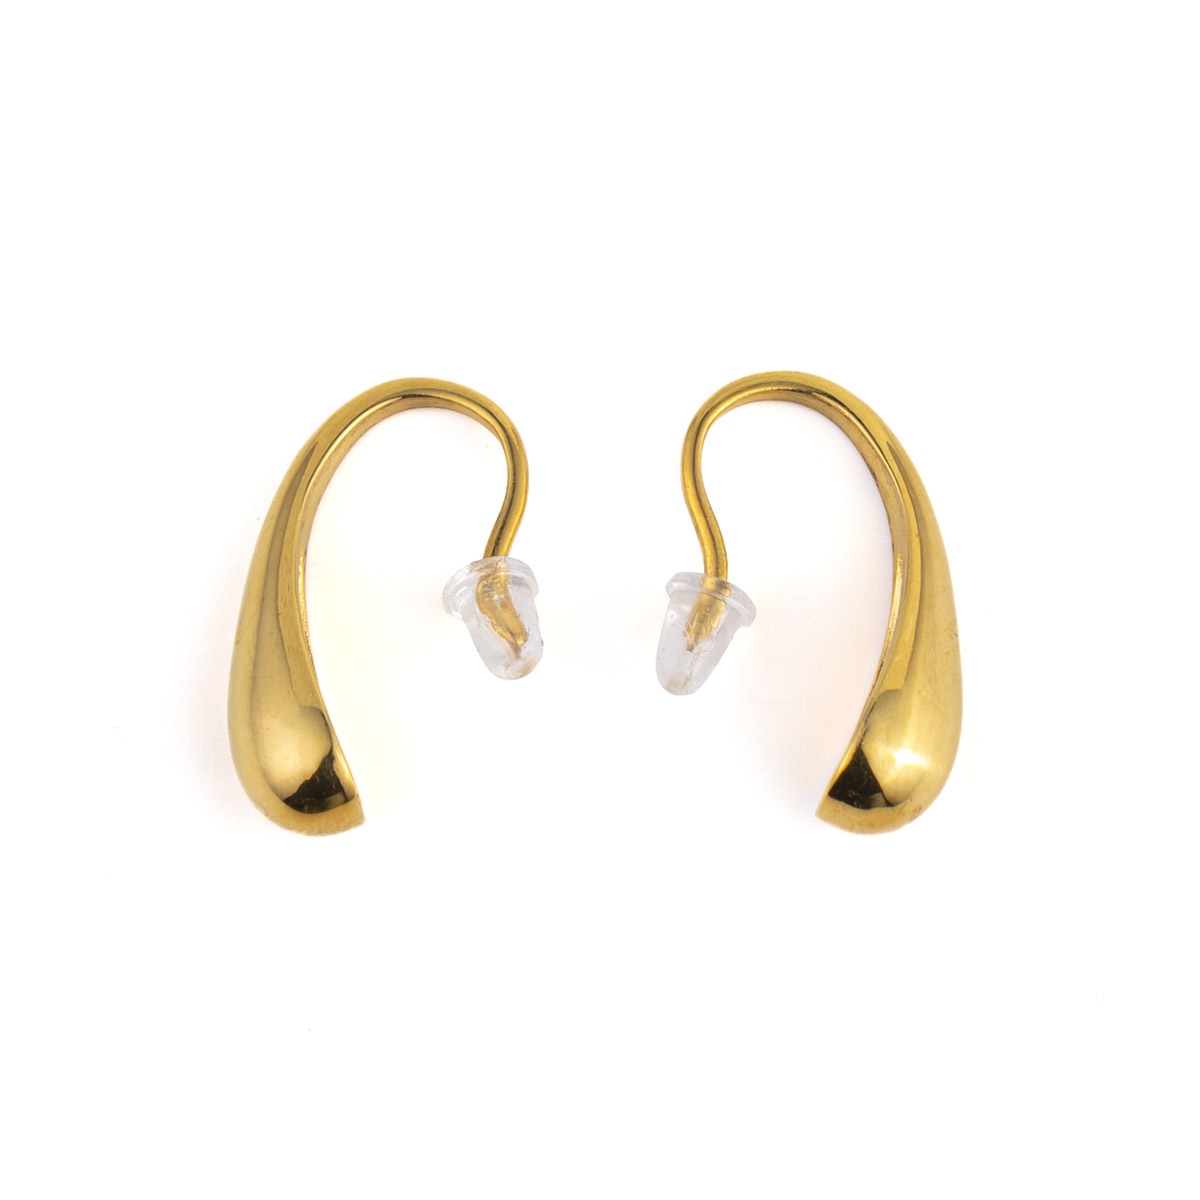 Drop Earrings - Gold Plated Silver 925